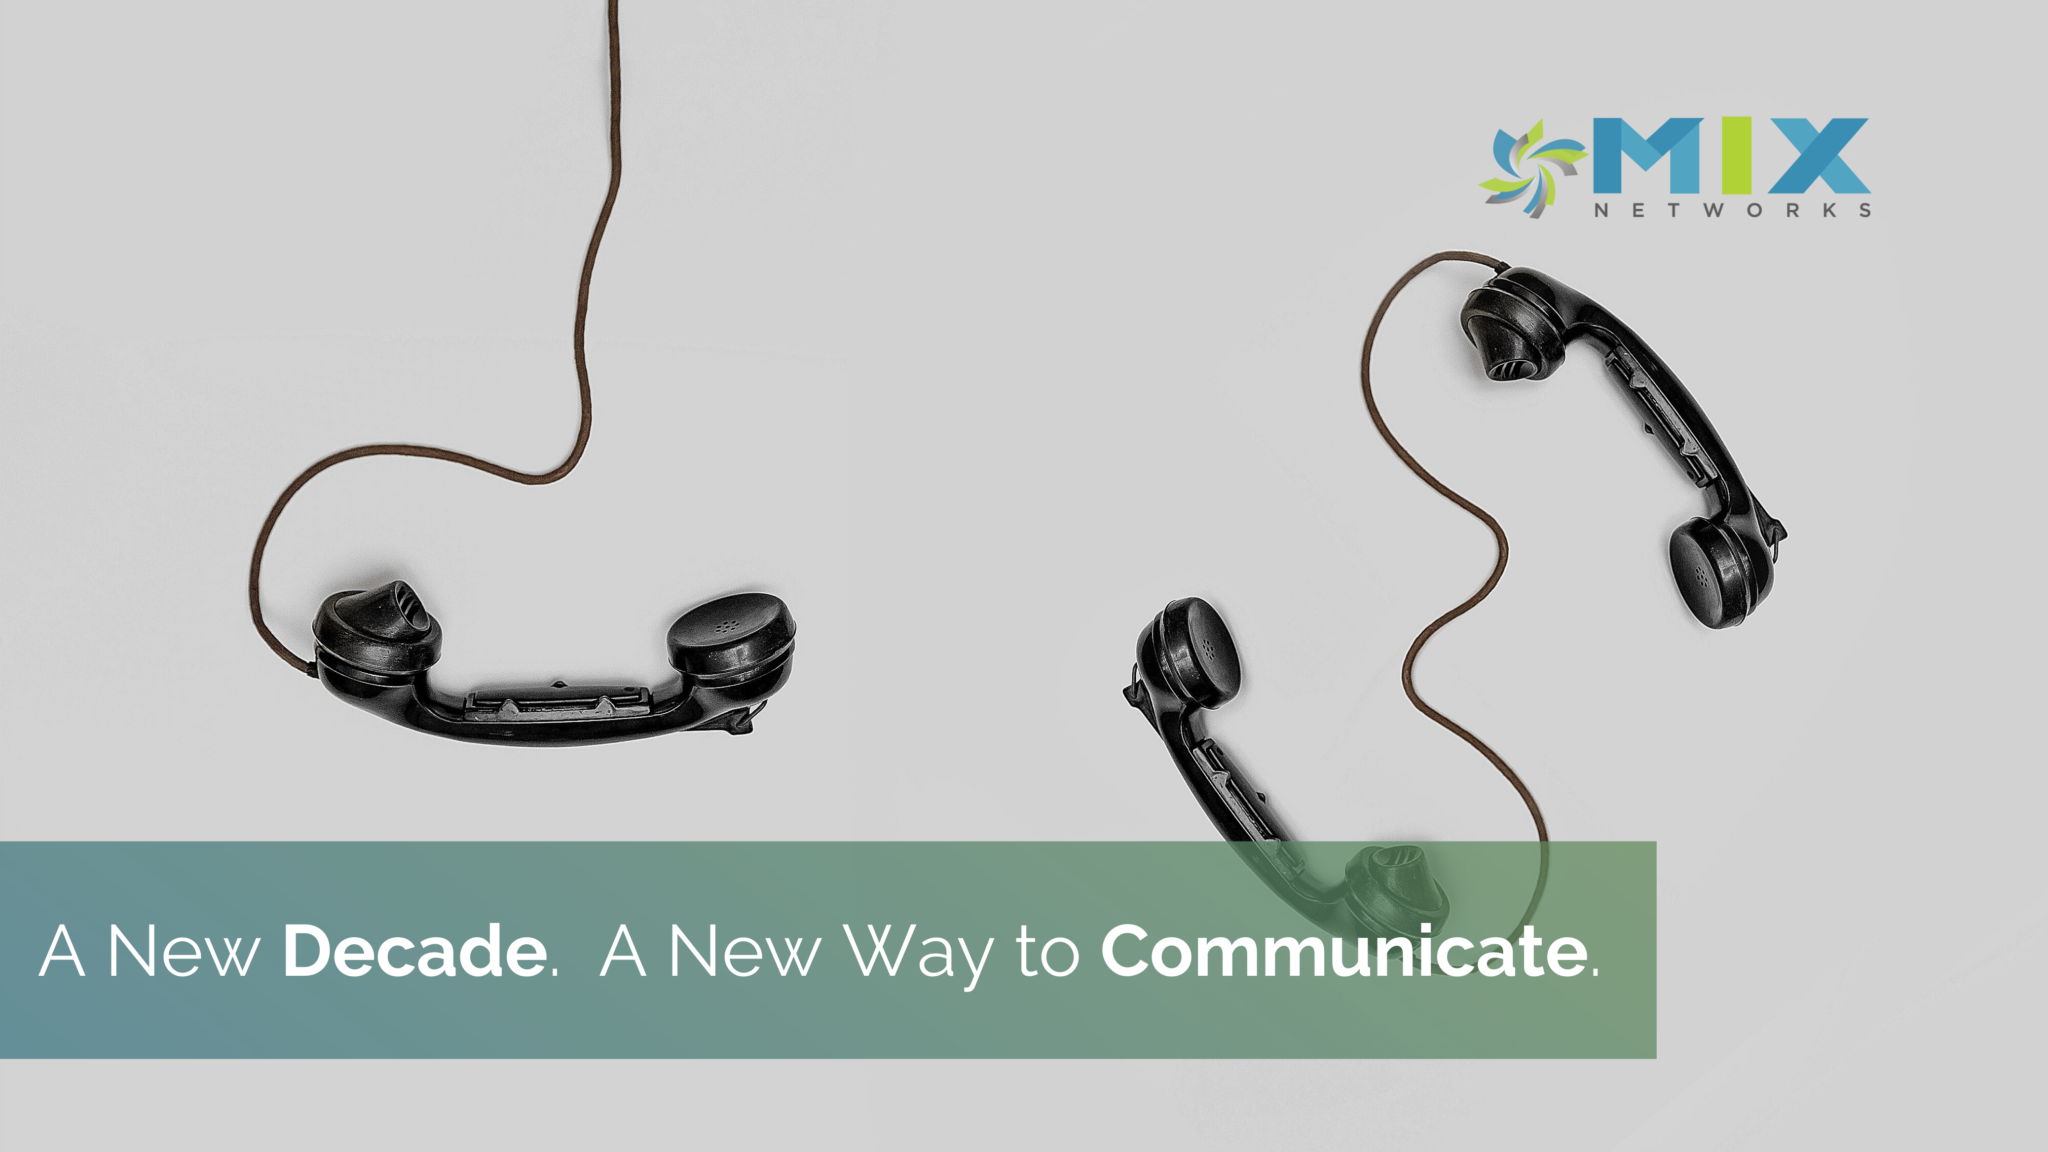 Unified Communications in a New Decade